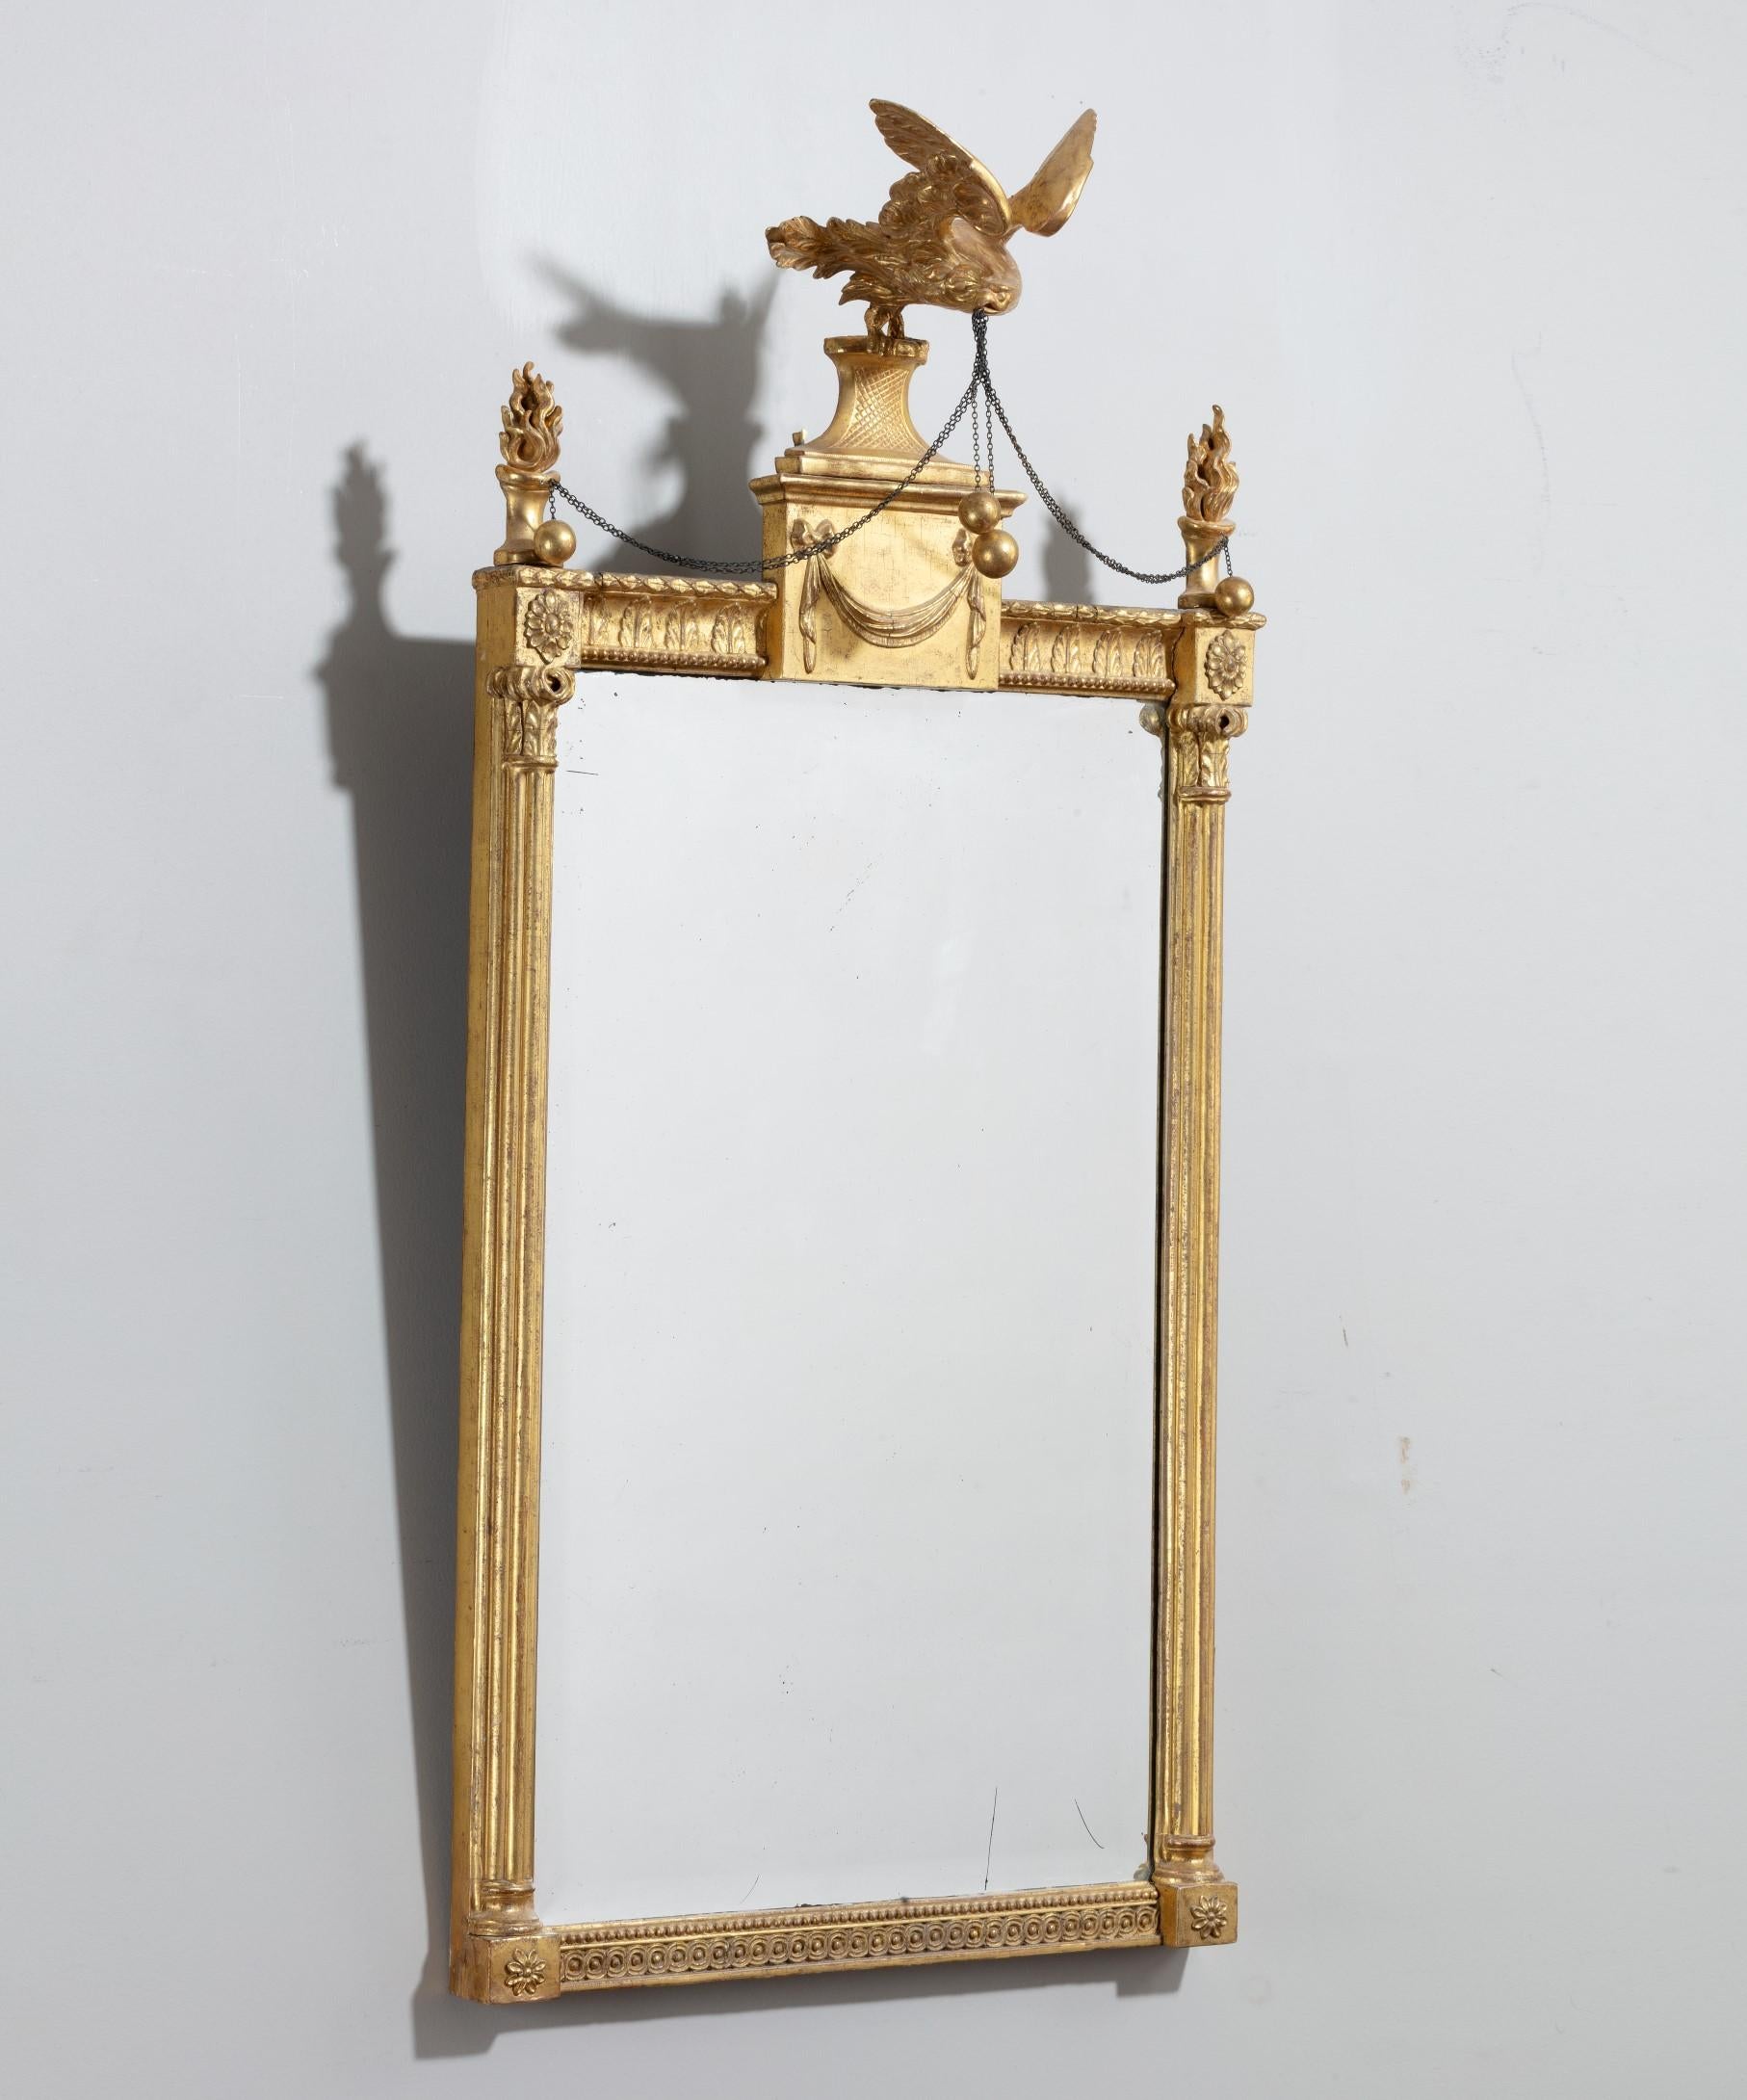 An elegant George III period Adam period giltwood pier glass mirror; the original bevelled mirror plate set within a giltwood neoclassical frame; the mirror's giltwood frame has acanthus leaf cornice with a central entablature topped by a carved